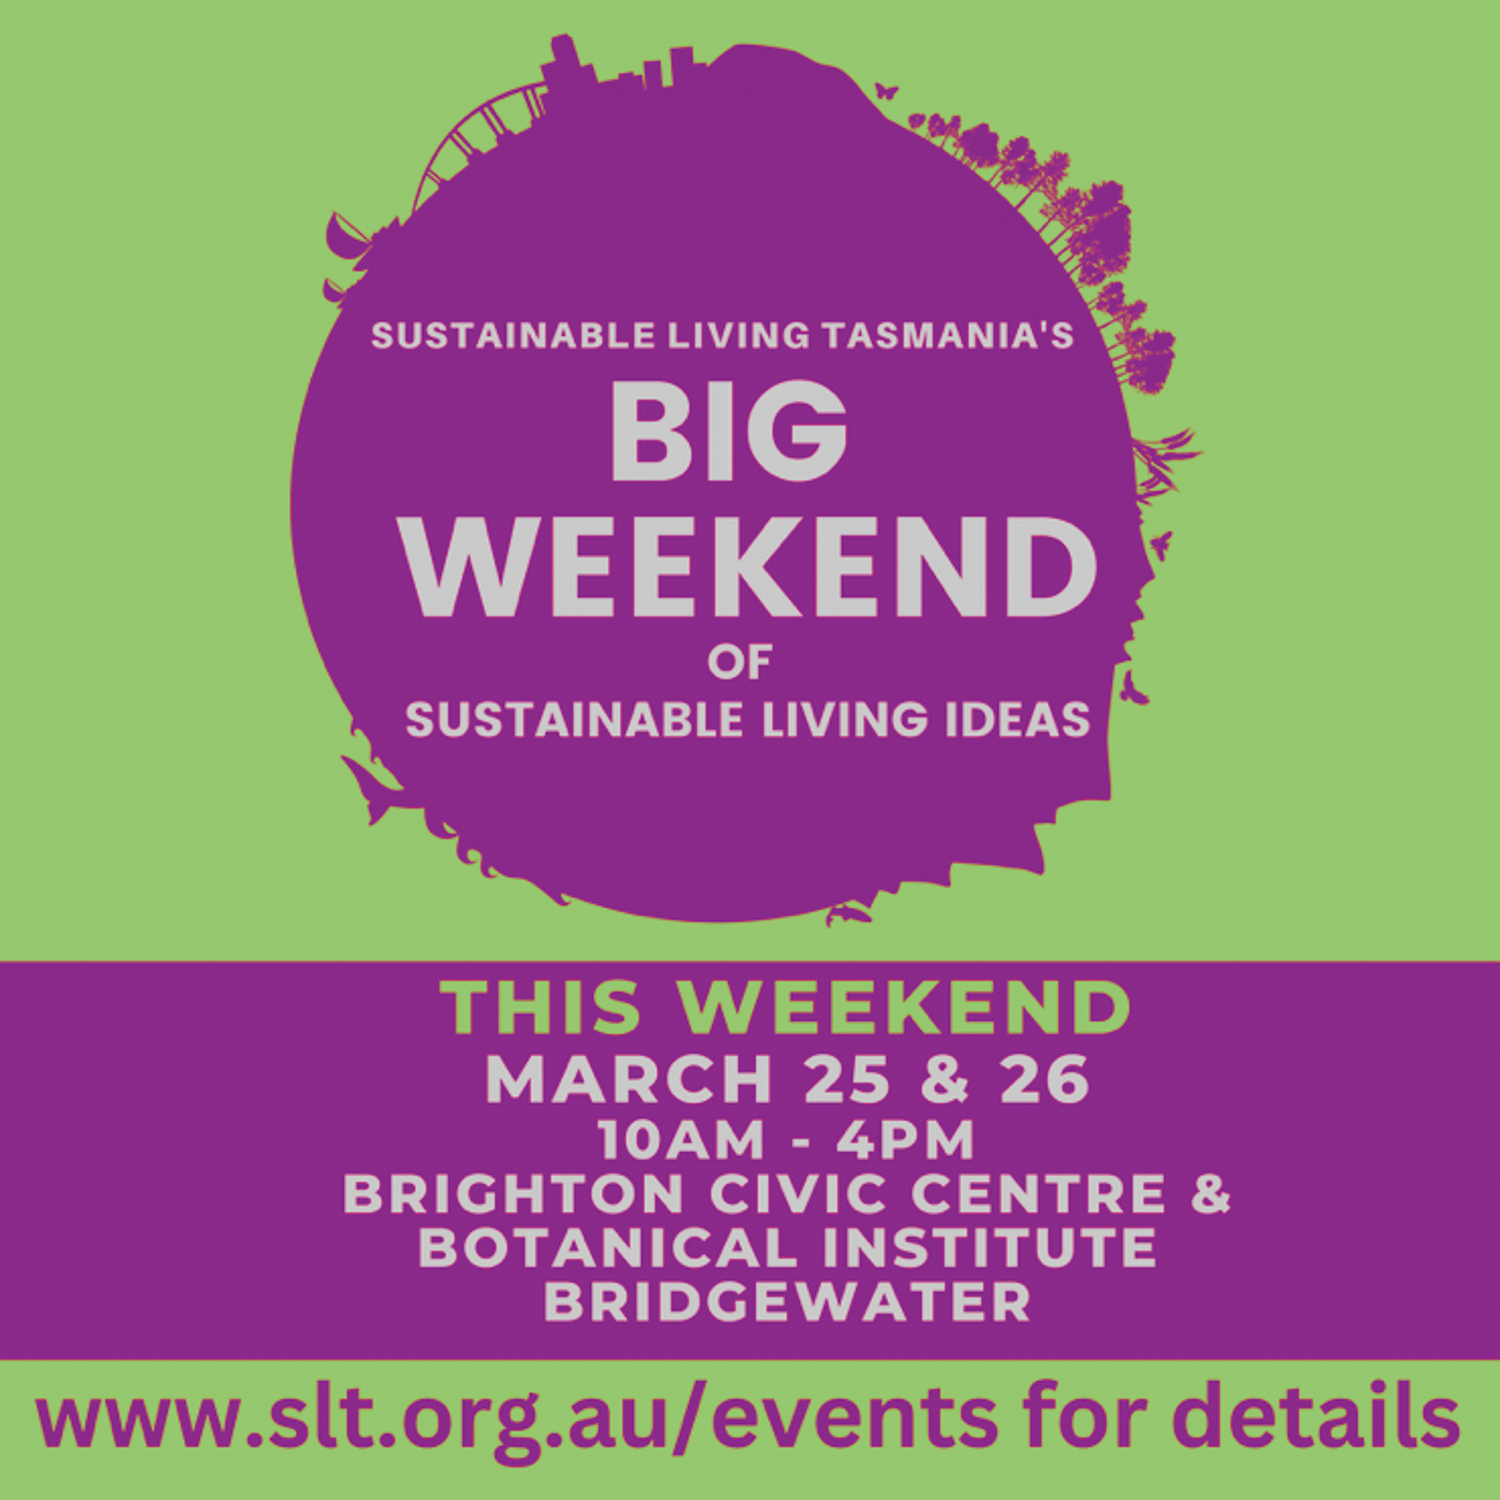 Green tile with purple highlights for the Big Weekend of Sustainable Living Ideas